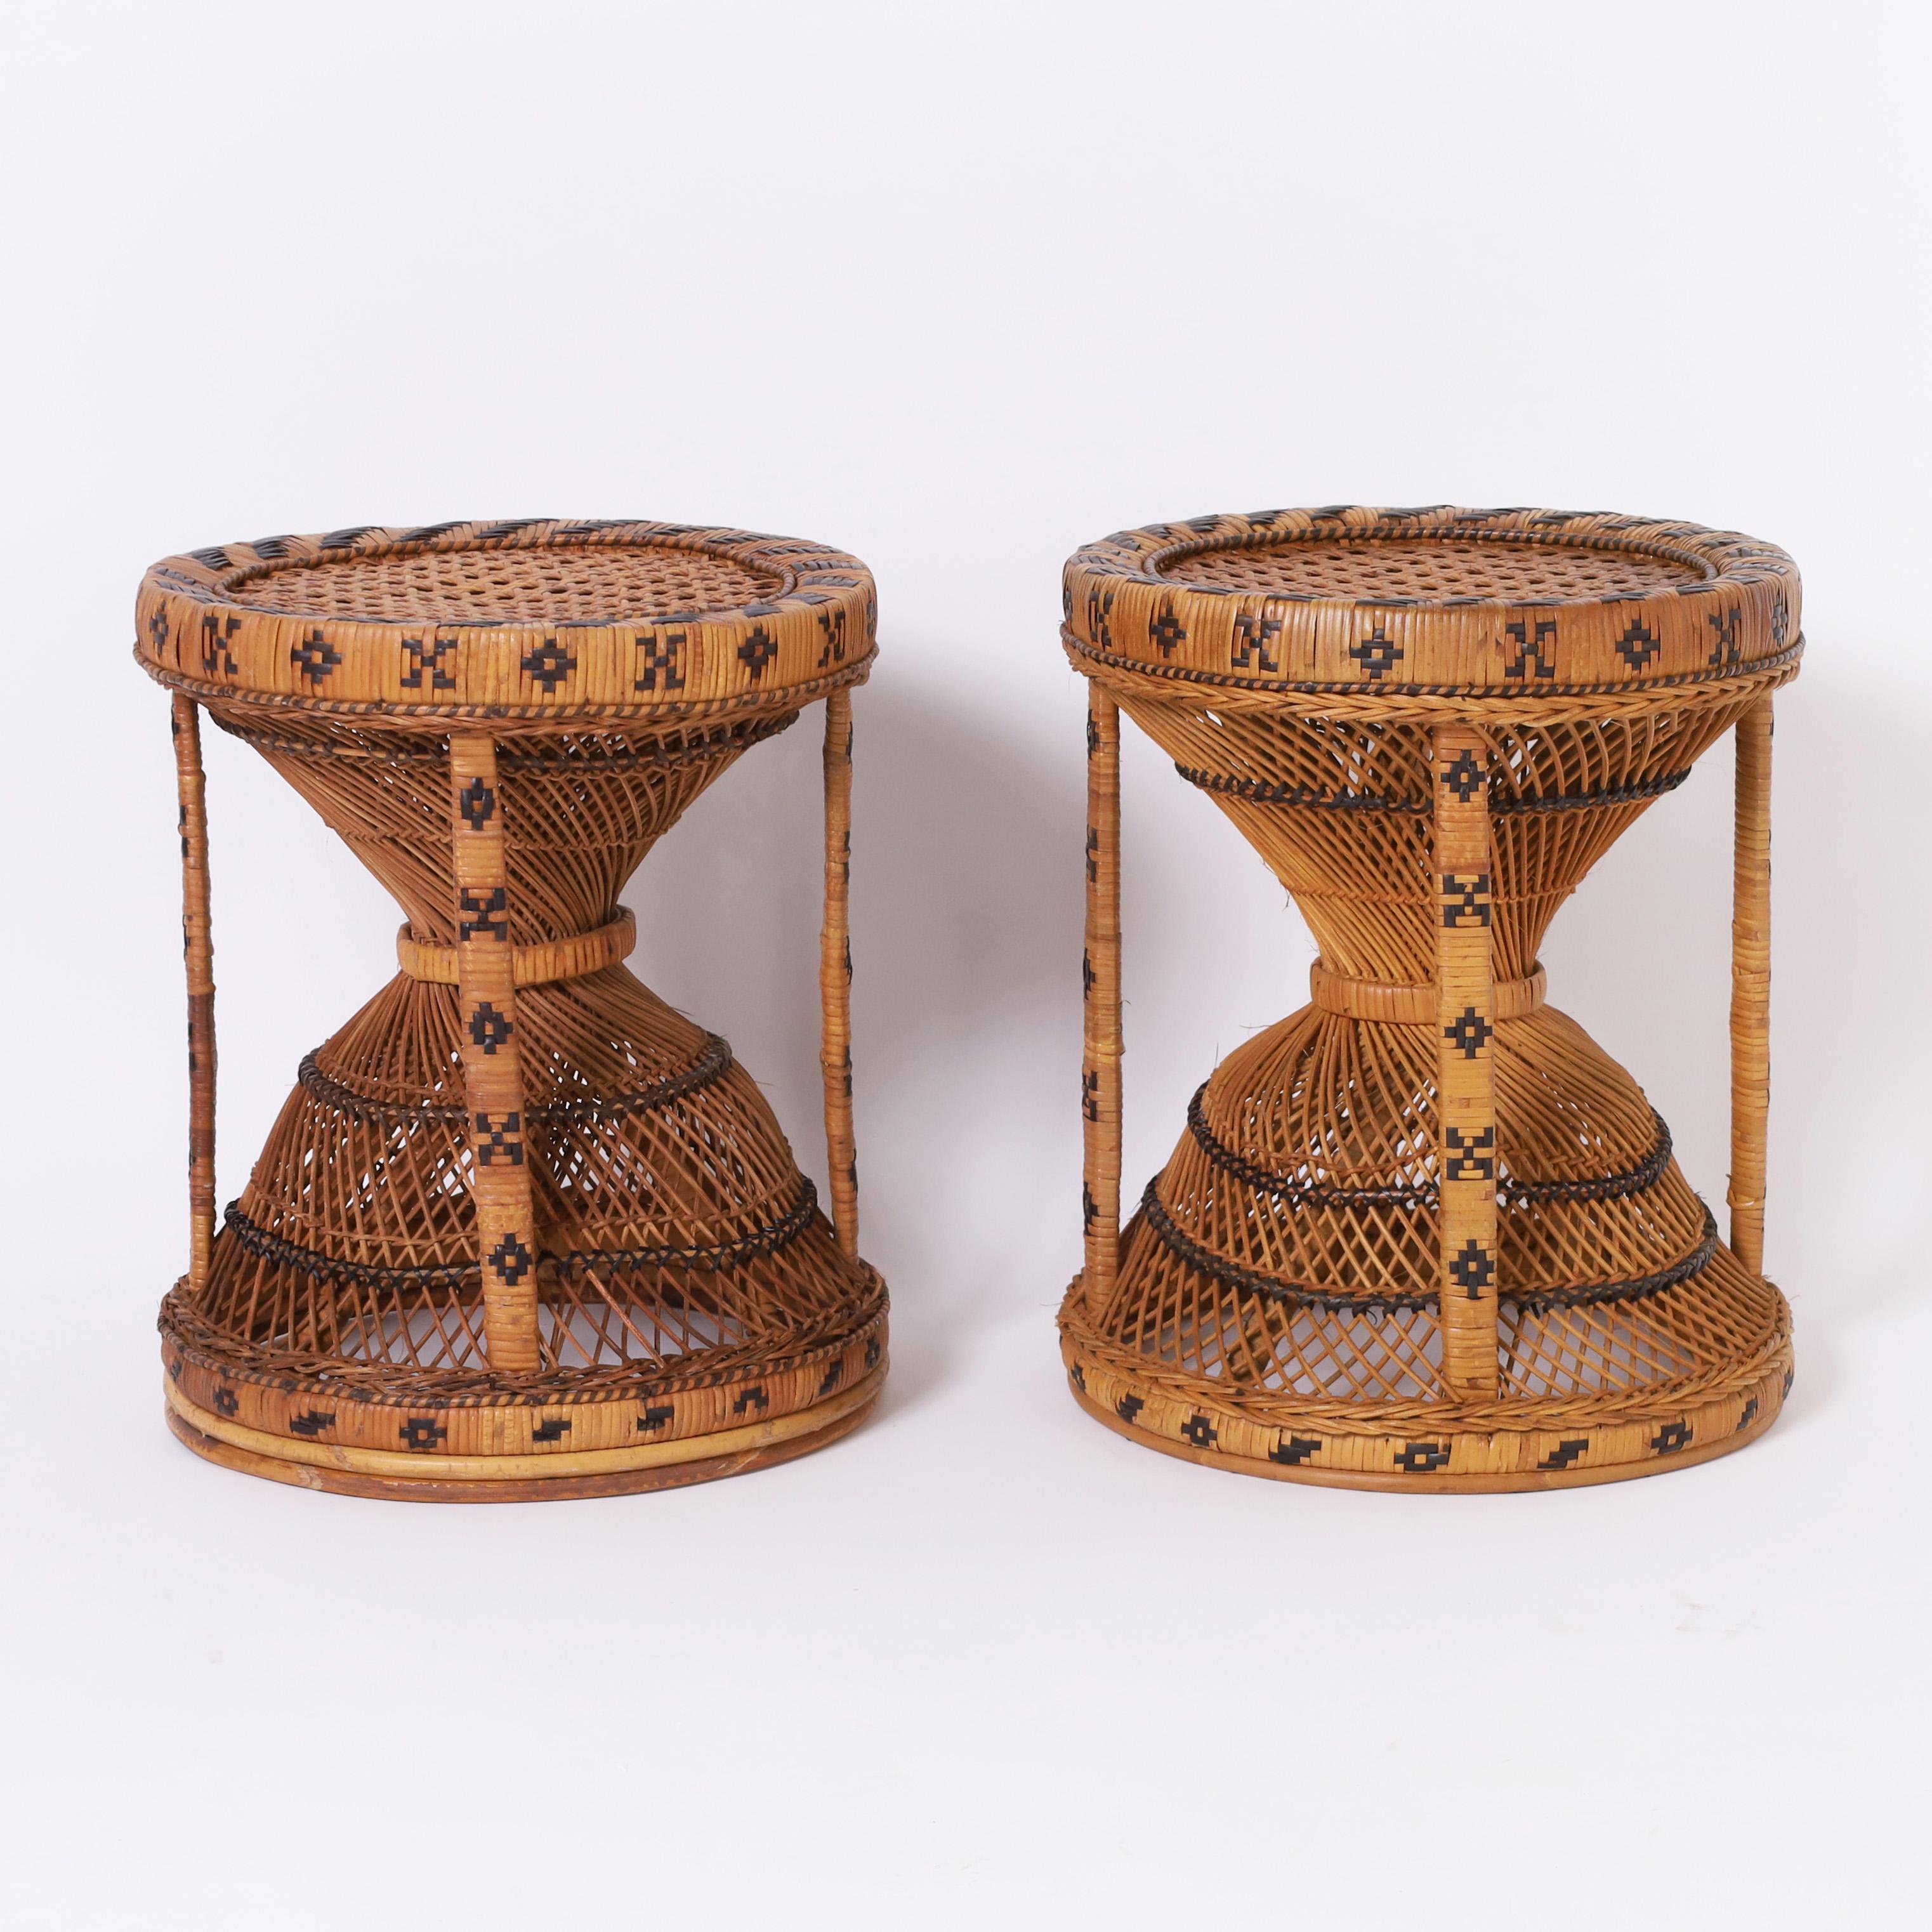 British colonial pair of Anglo Indian stools or stands handcrafted in wicker and rattan in classic hourglass form with caned tops and decorated with geometric symbolic designs.